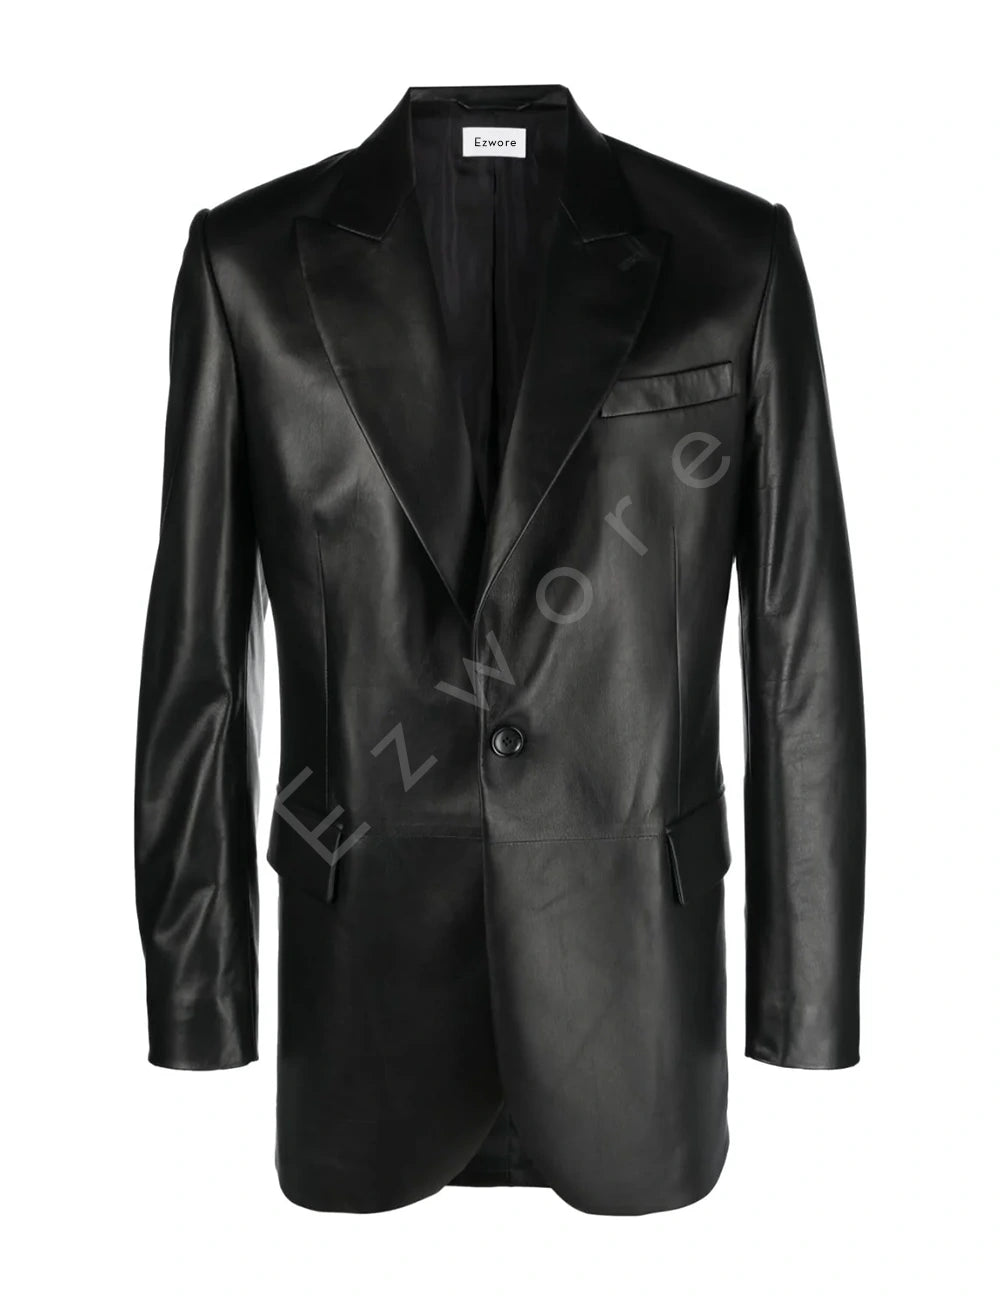 Mens 3 Button Excelled Leather Jacket